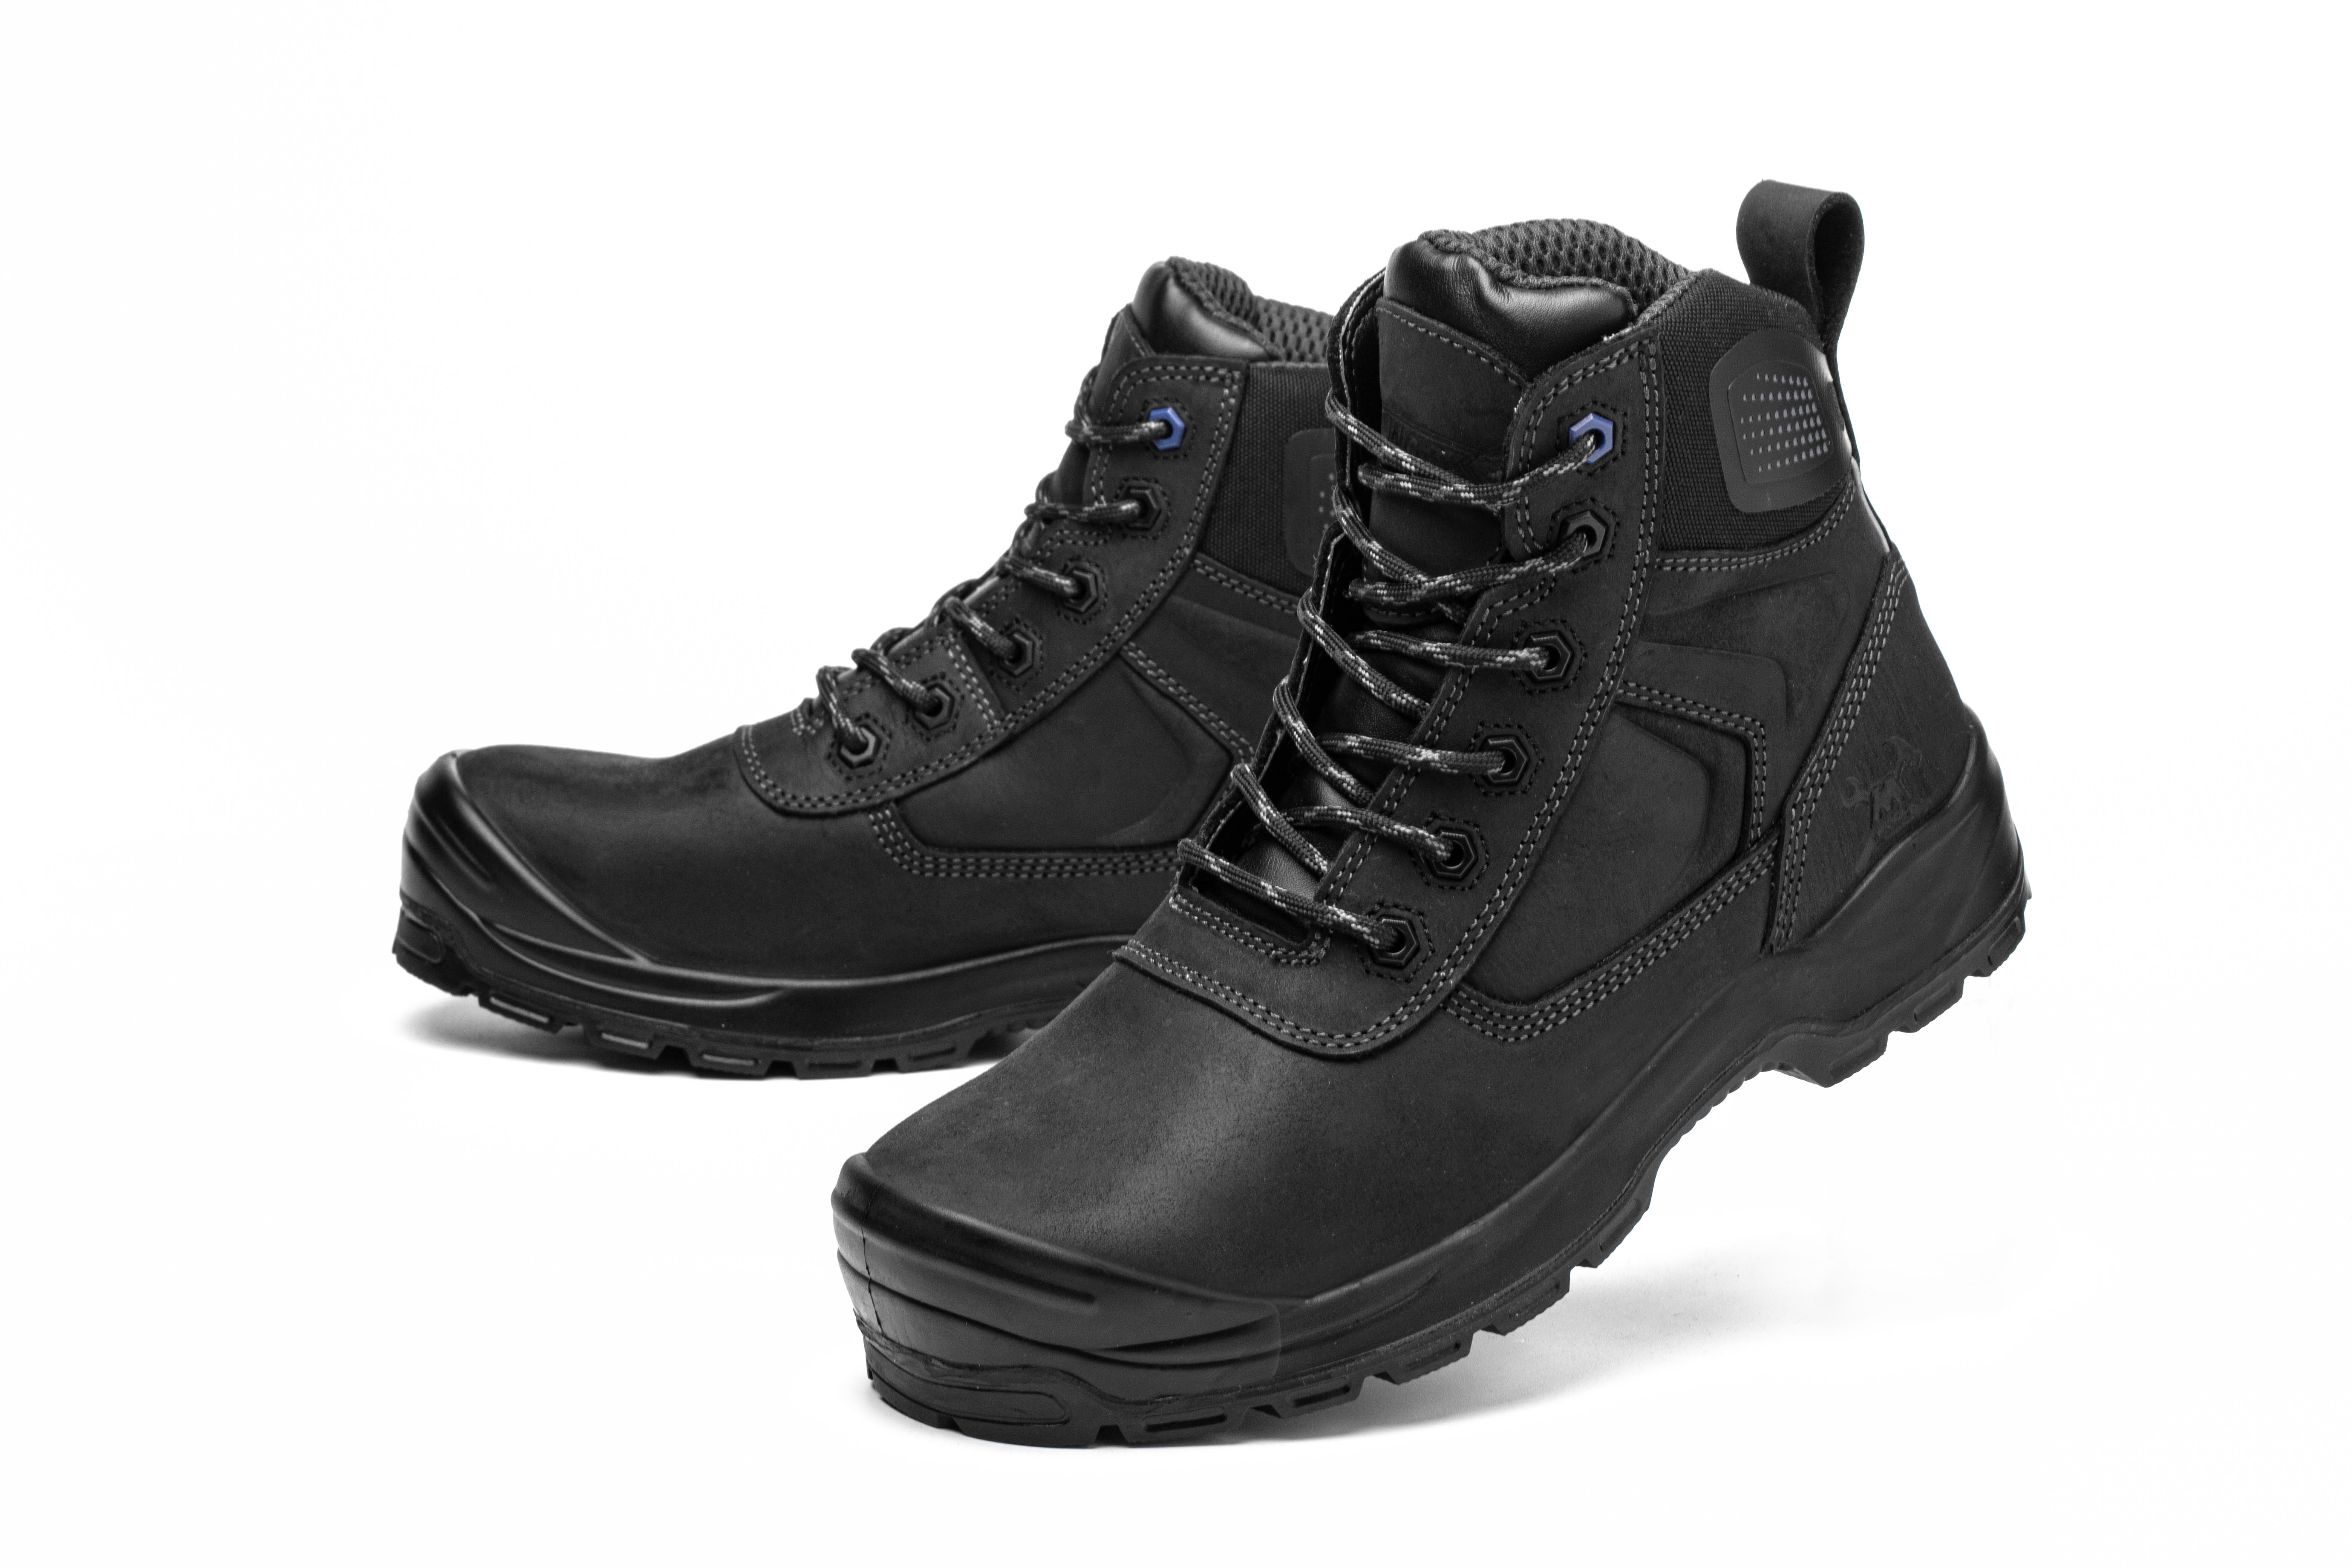 6 IN. Black Thor Composite toe&Plate Water Resistant No Metal Work Boot